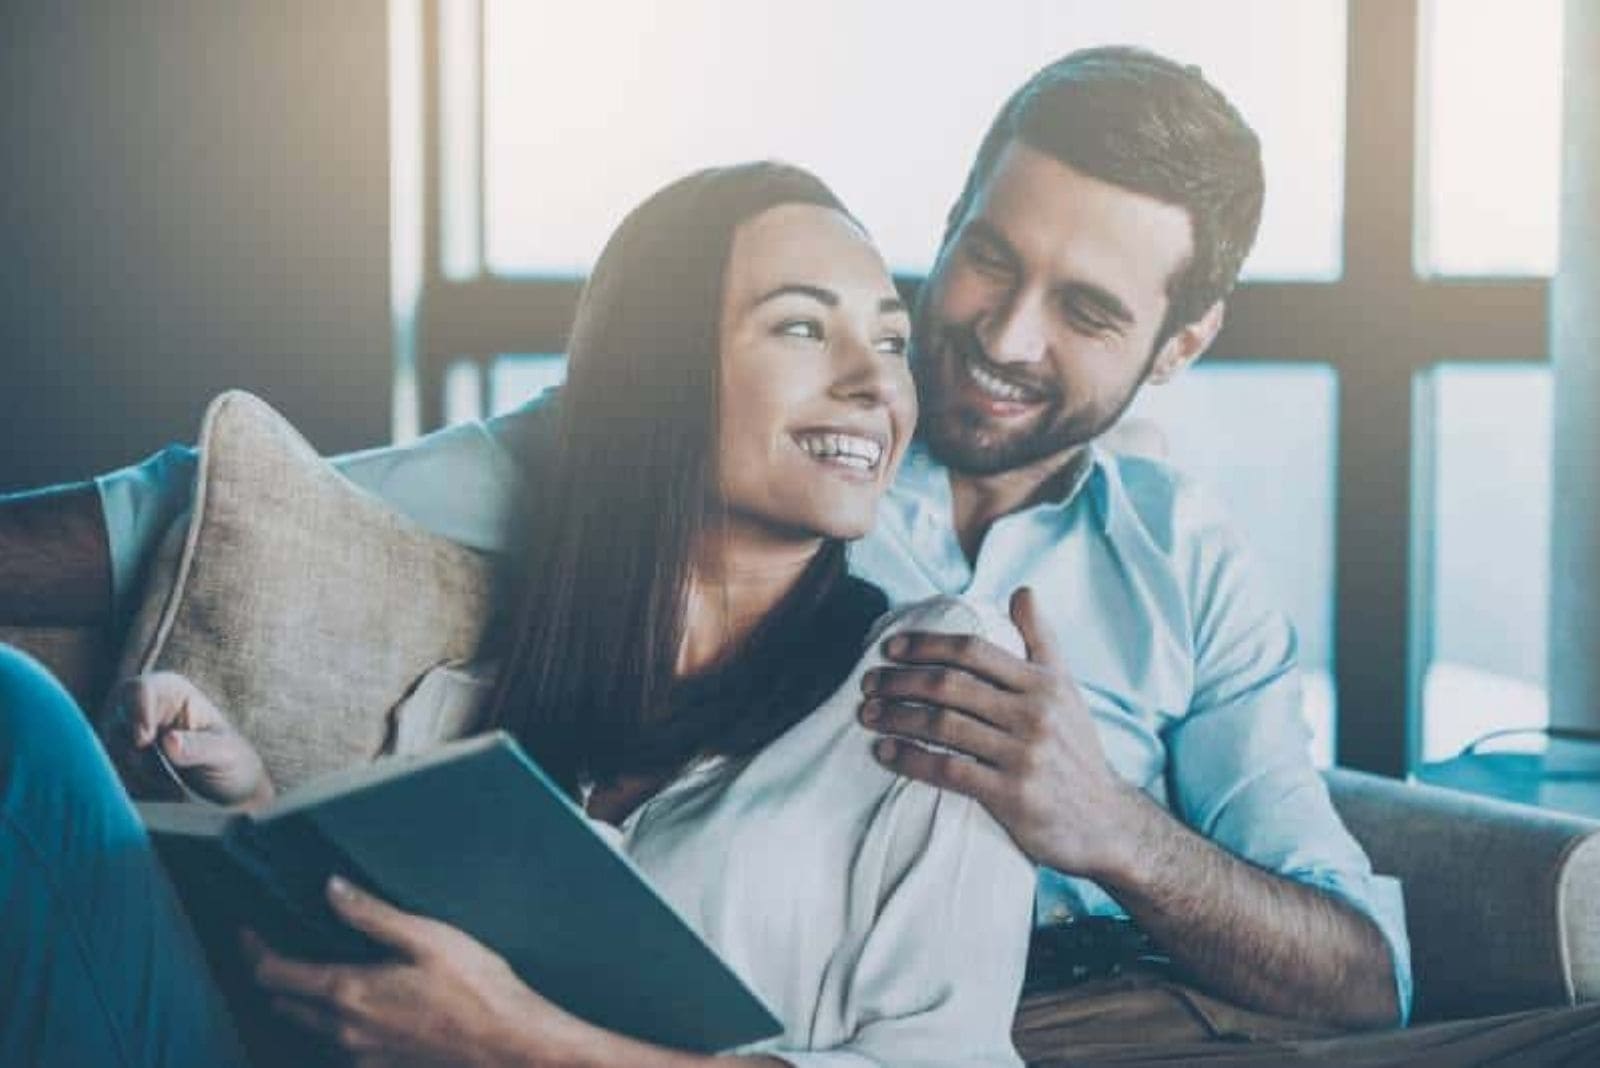 Beautiful young loving couple bonding to each other and smiling while woman holding a book